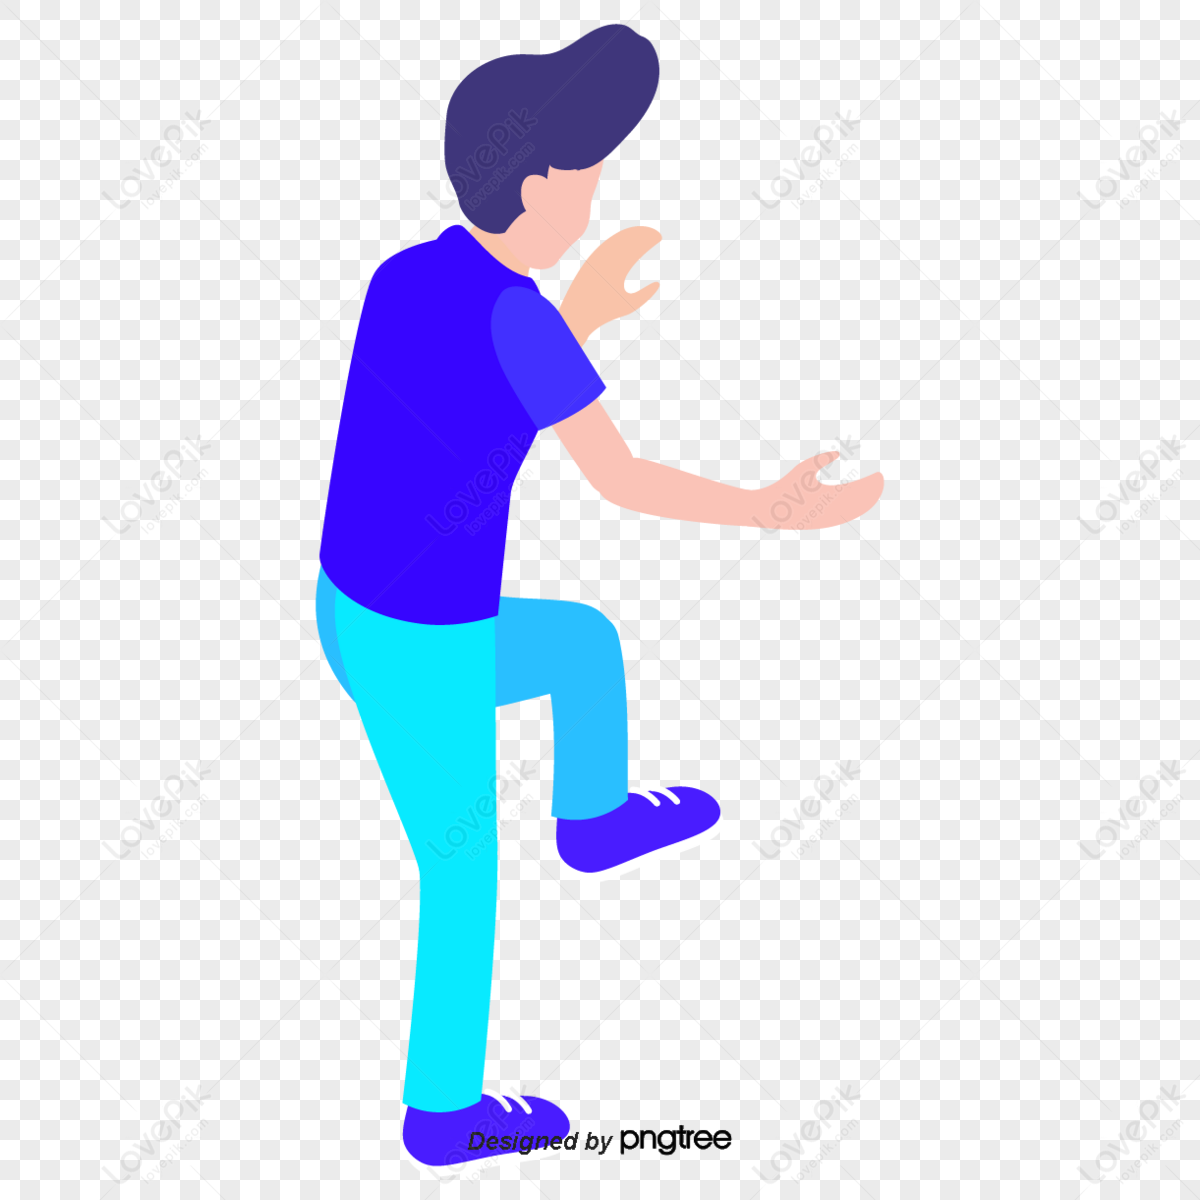 Walking PNG Images With Transparent Background